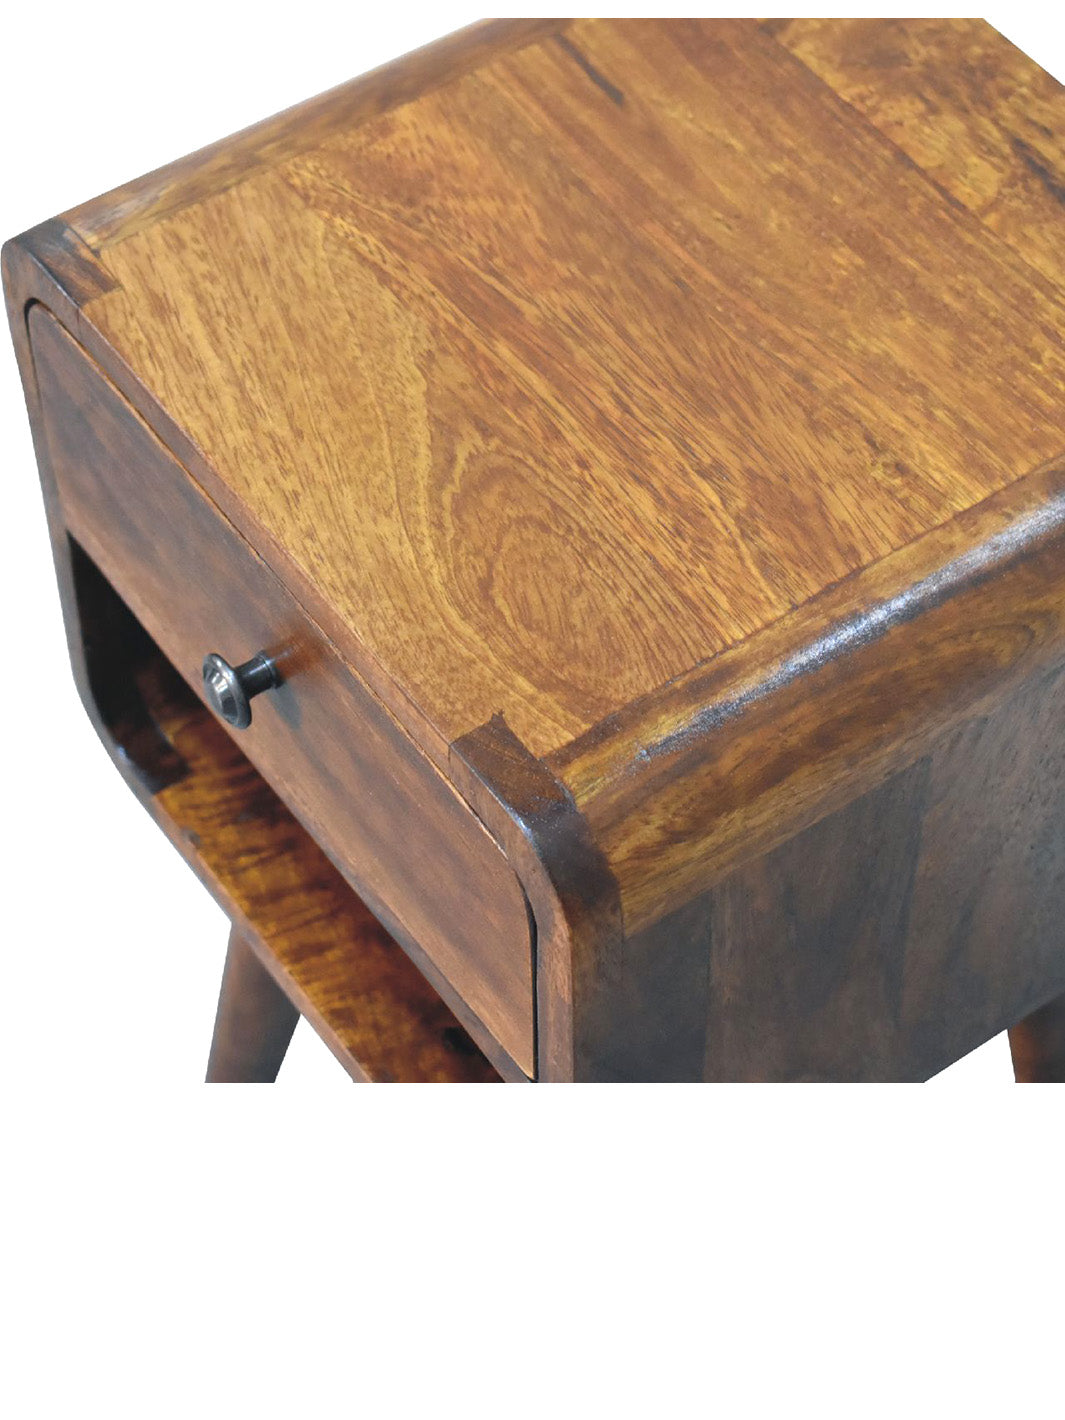 Artisan Furniture Nightstands Mini Chestnut Curved Bedside with Lower Slot IN3350